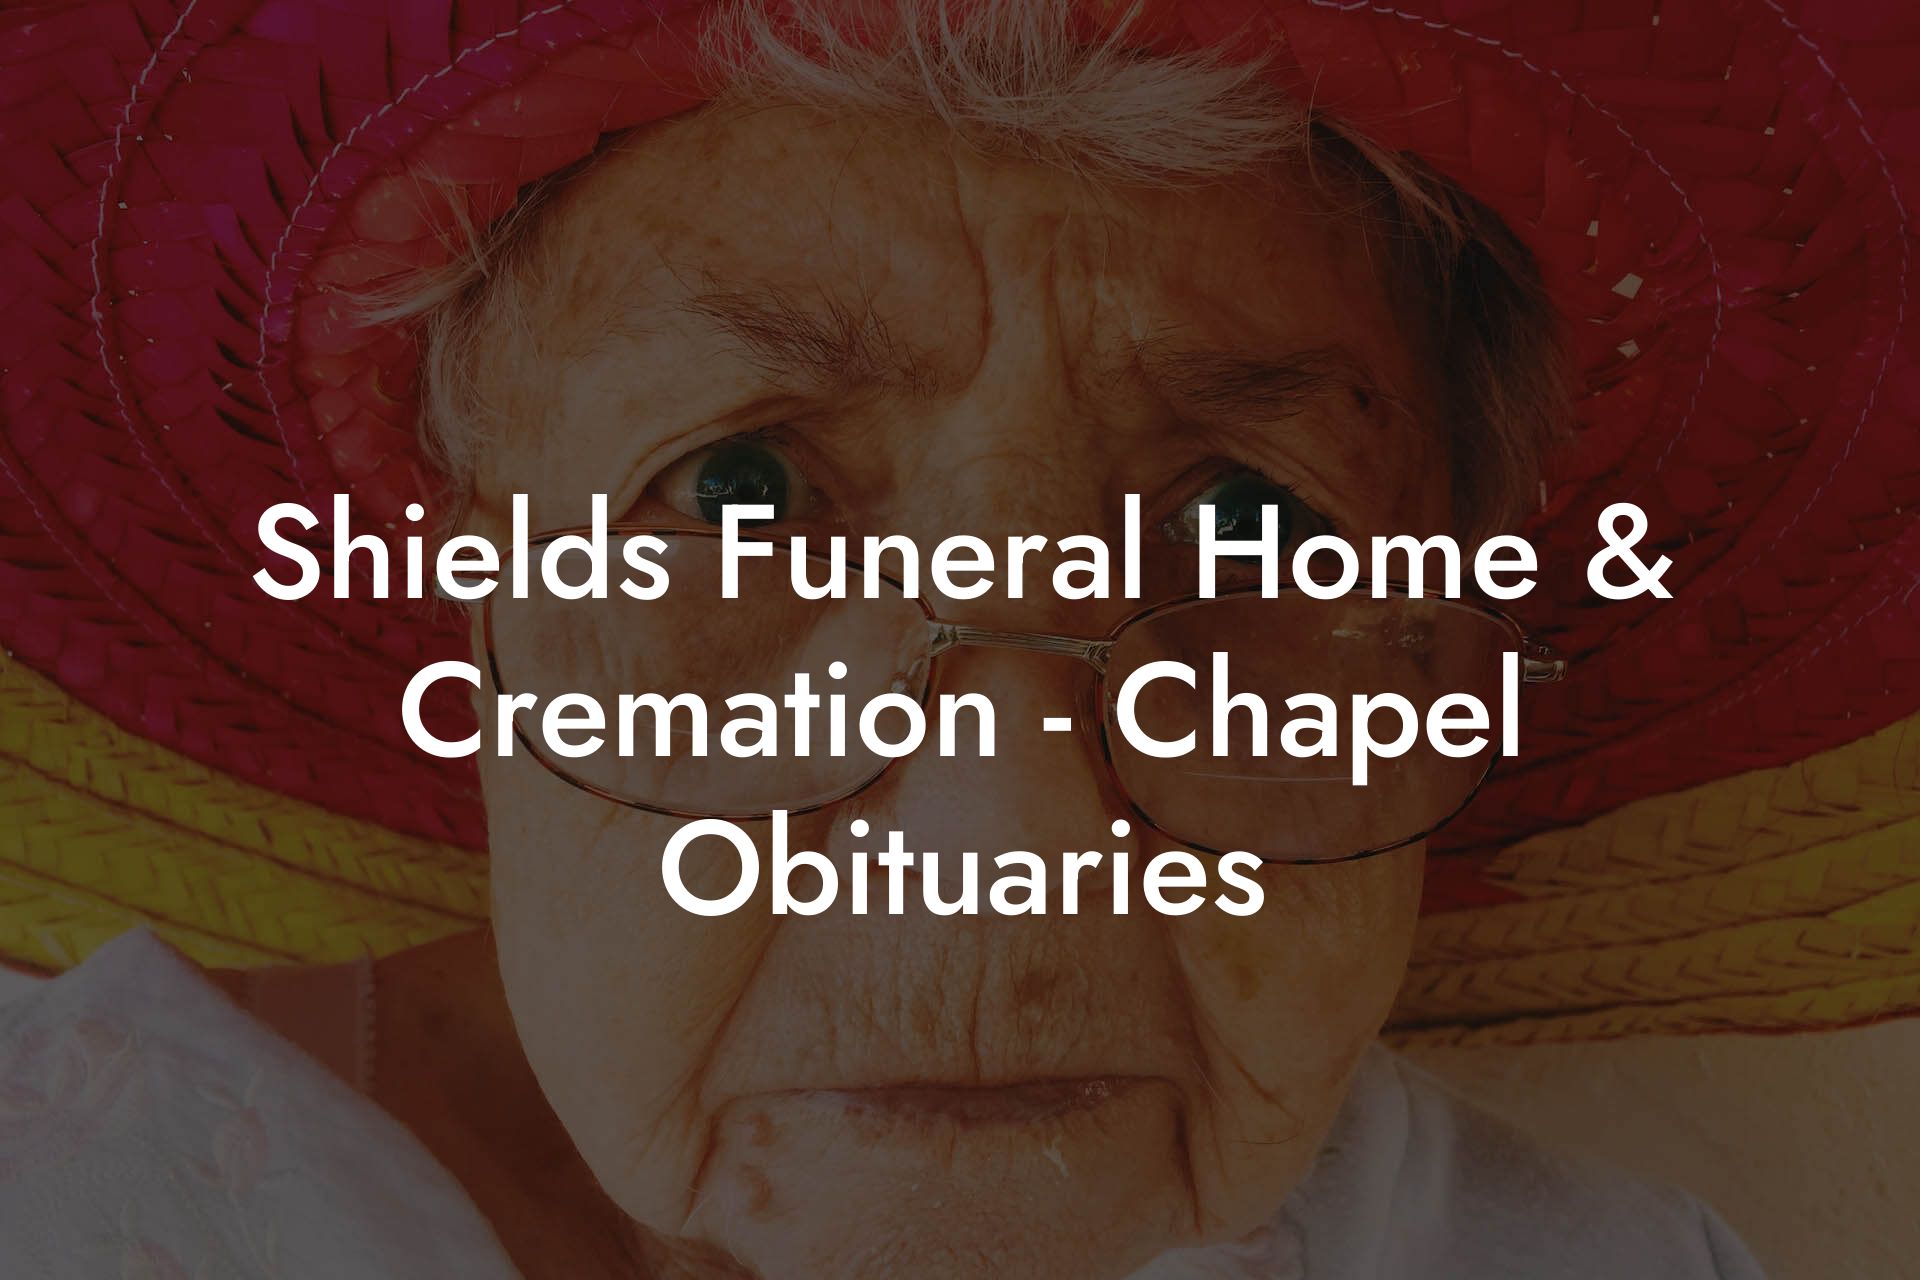 Shields Funeral Home & Cremation - Chapel Obituaries